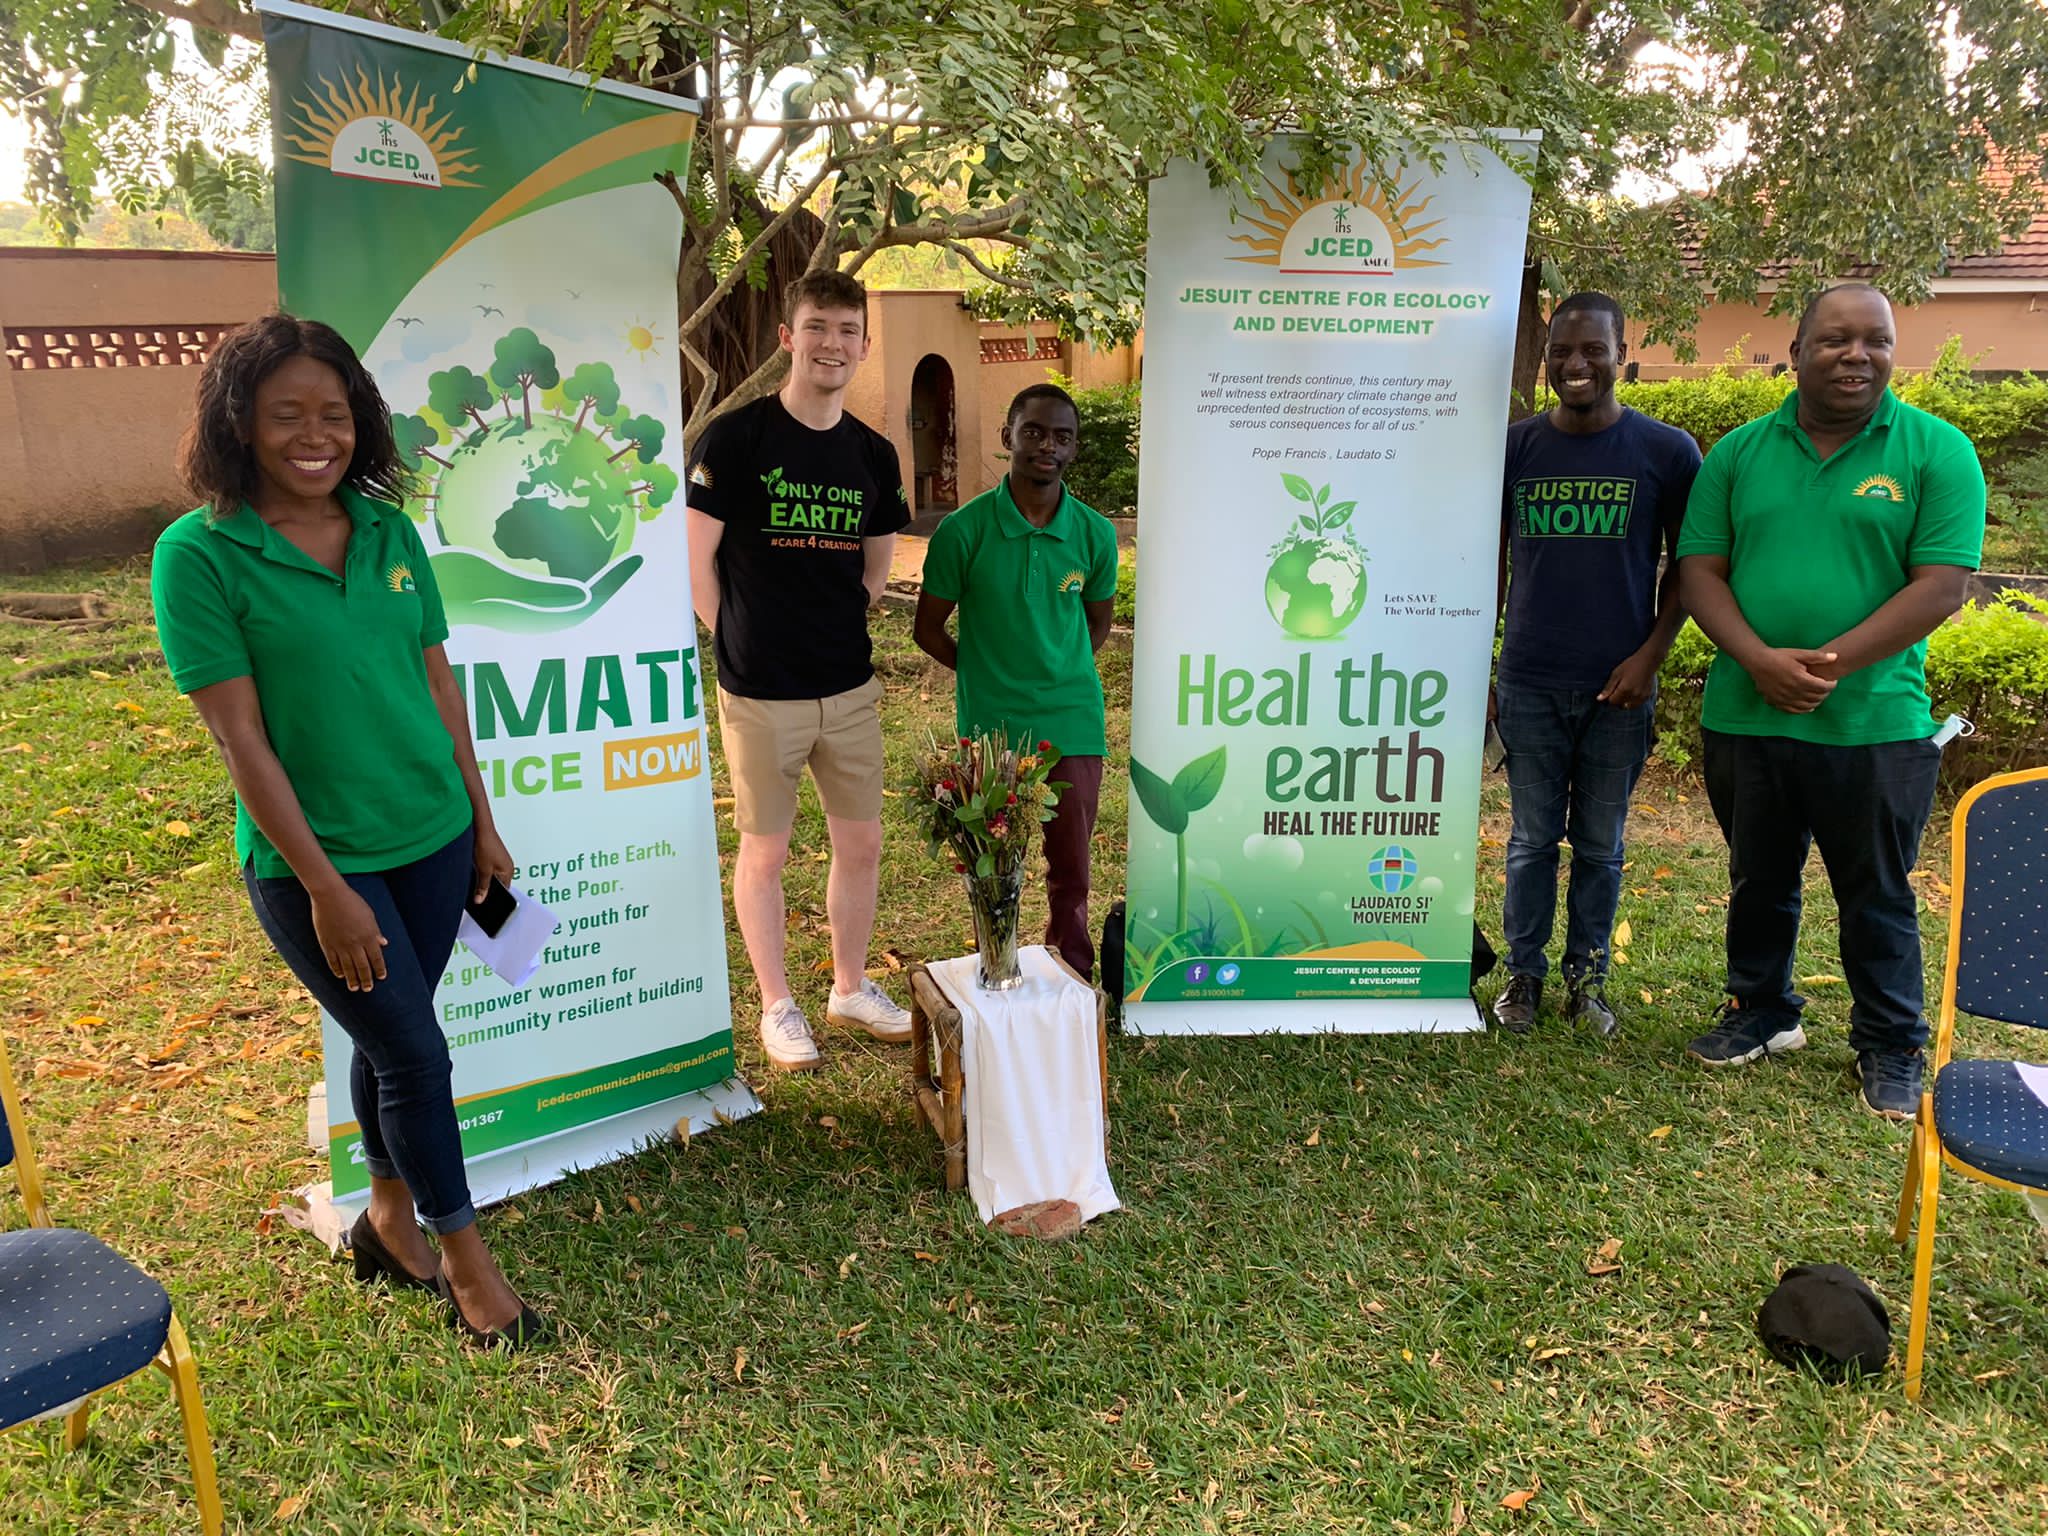 Sam, Martha and Brother ngoni stand outside beside Laudato si banners under the shade of a tree.